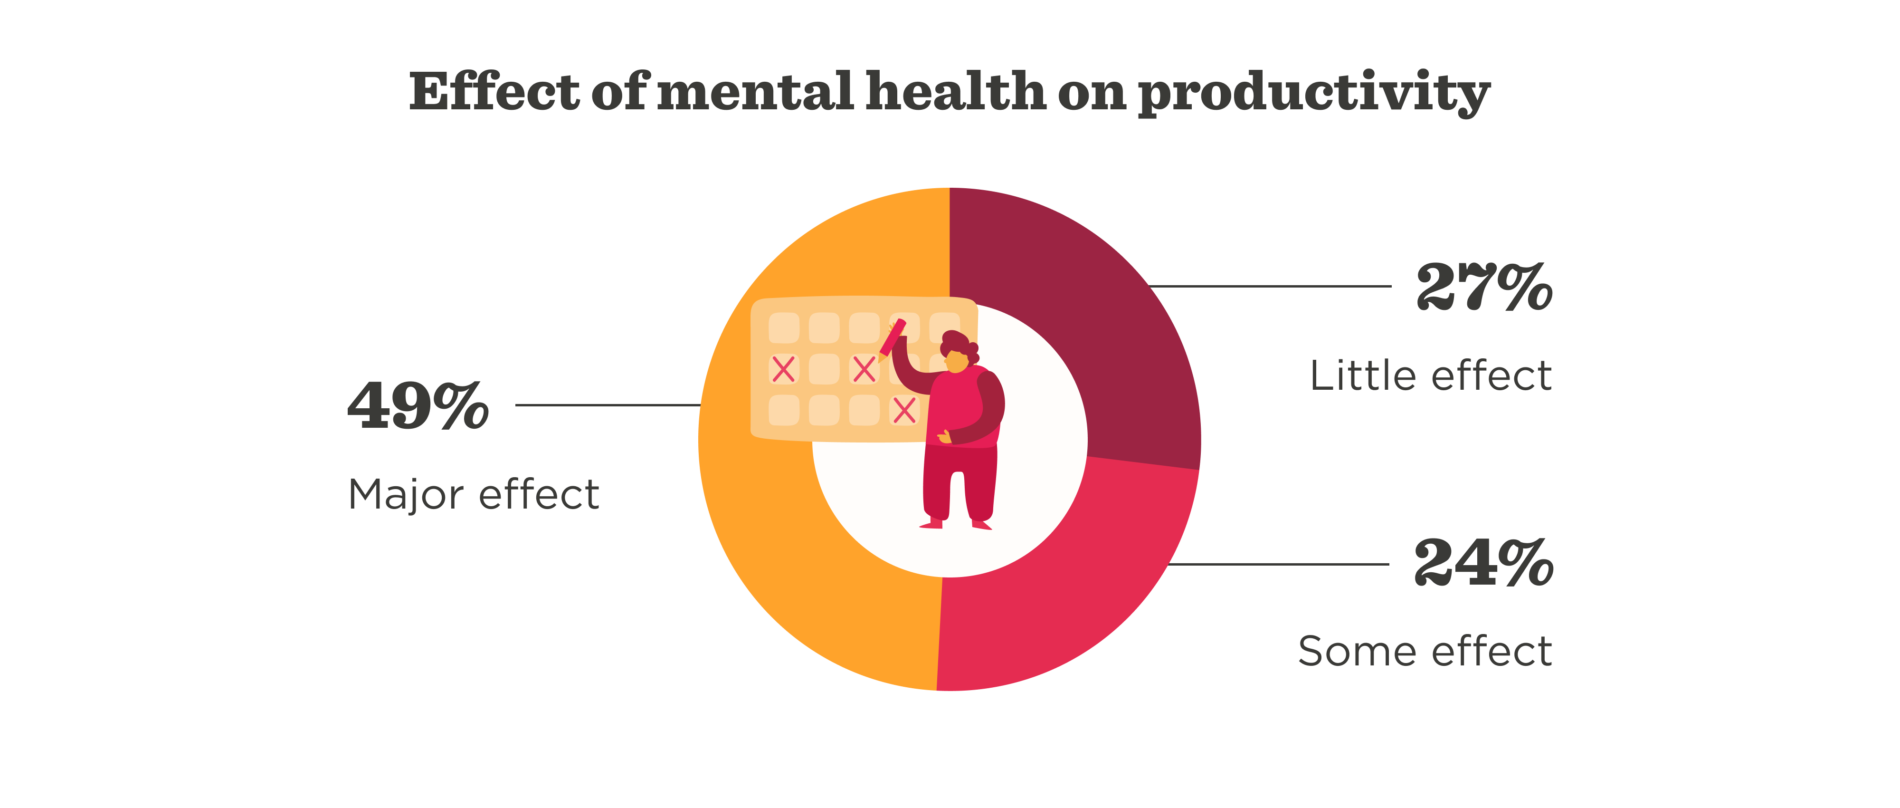 Let’s talk about mental health in the workplace and what HR can do - Graph-1-1900x808.png